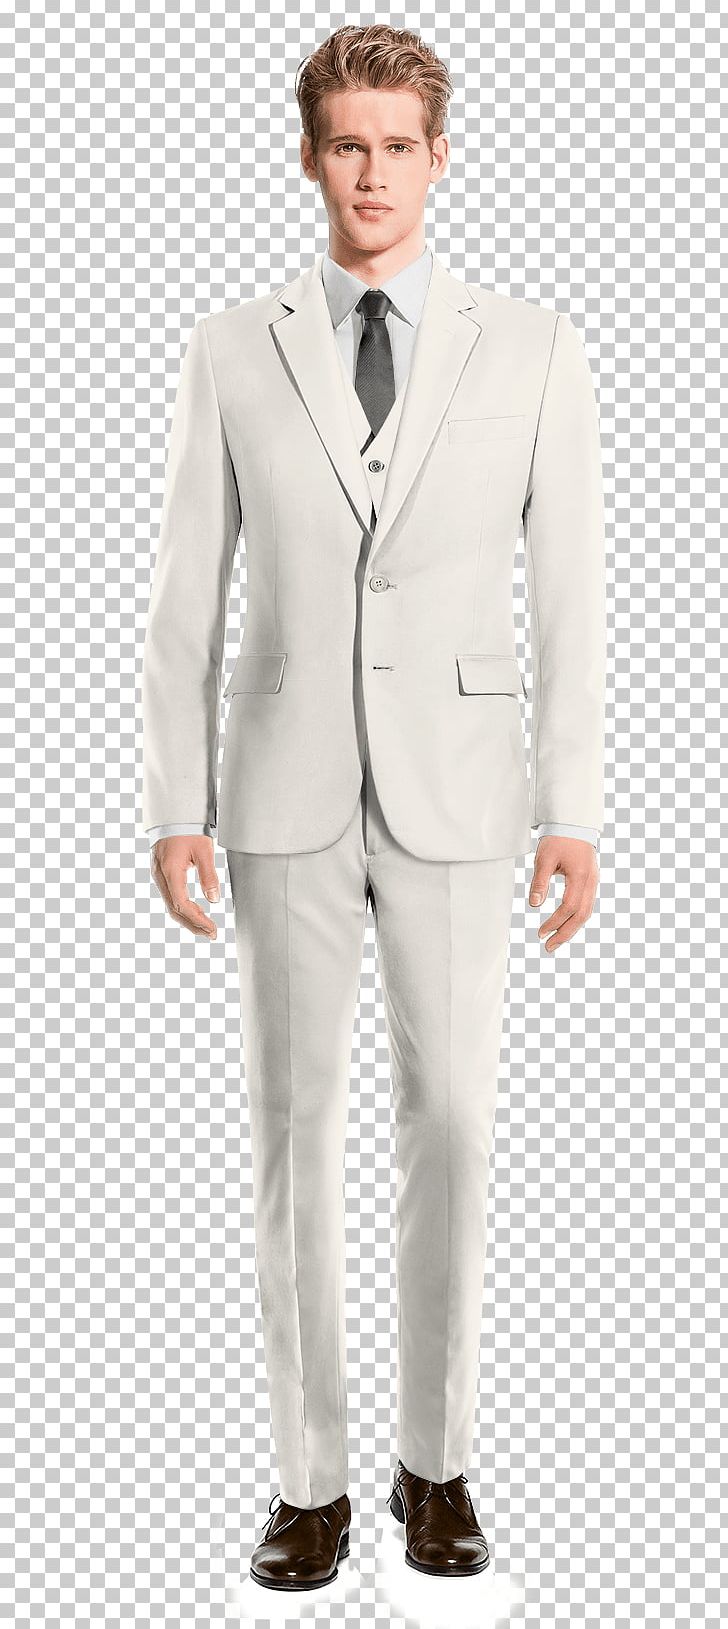 Double-breasted Suit Single-breasted Tuxedo Blazer PNG, Clipart, Blazer, Clothing, Coat, Collar, Costume Free PNG Download